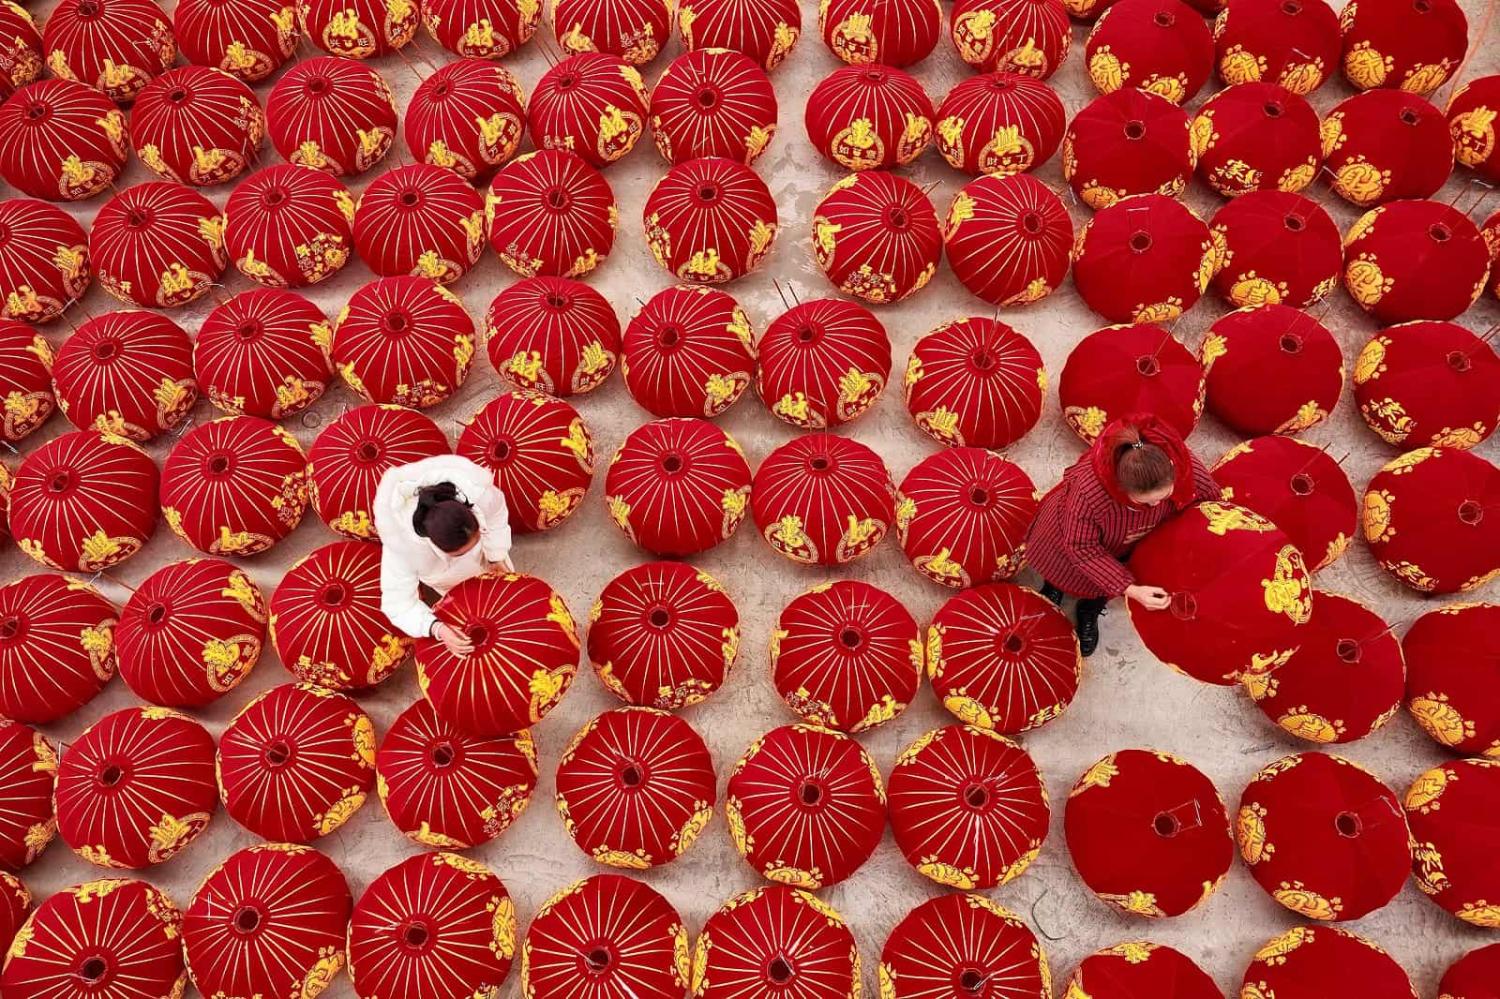 Australians see China as both an economic partner and a security threat. A worker produces red lanterns ahead of New Year's Day in Danzhai, China (STR/AFP via Getty Images)